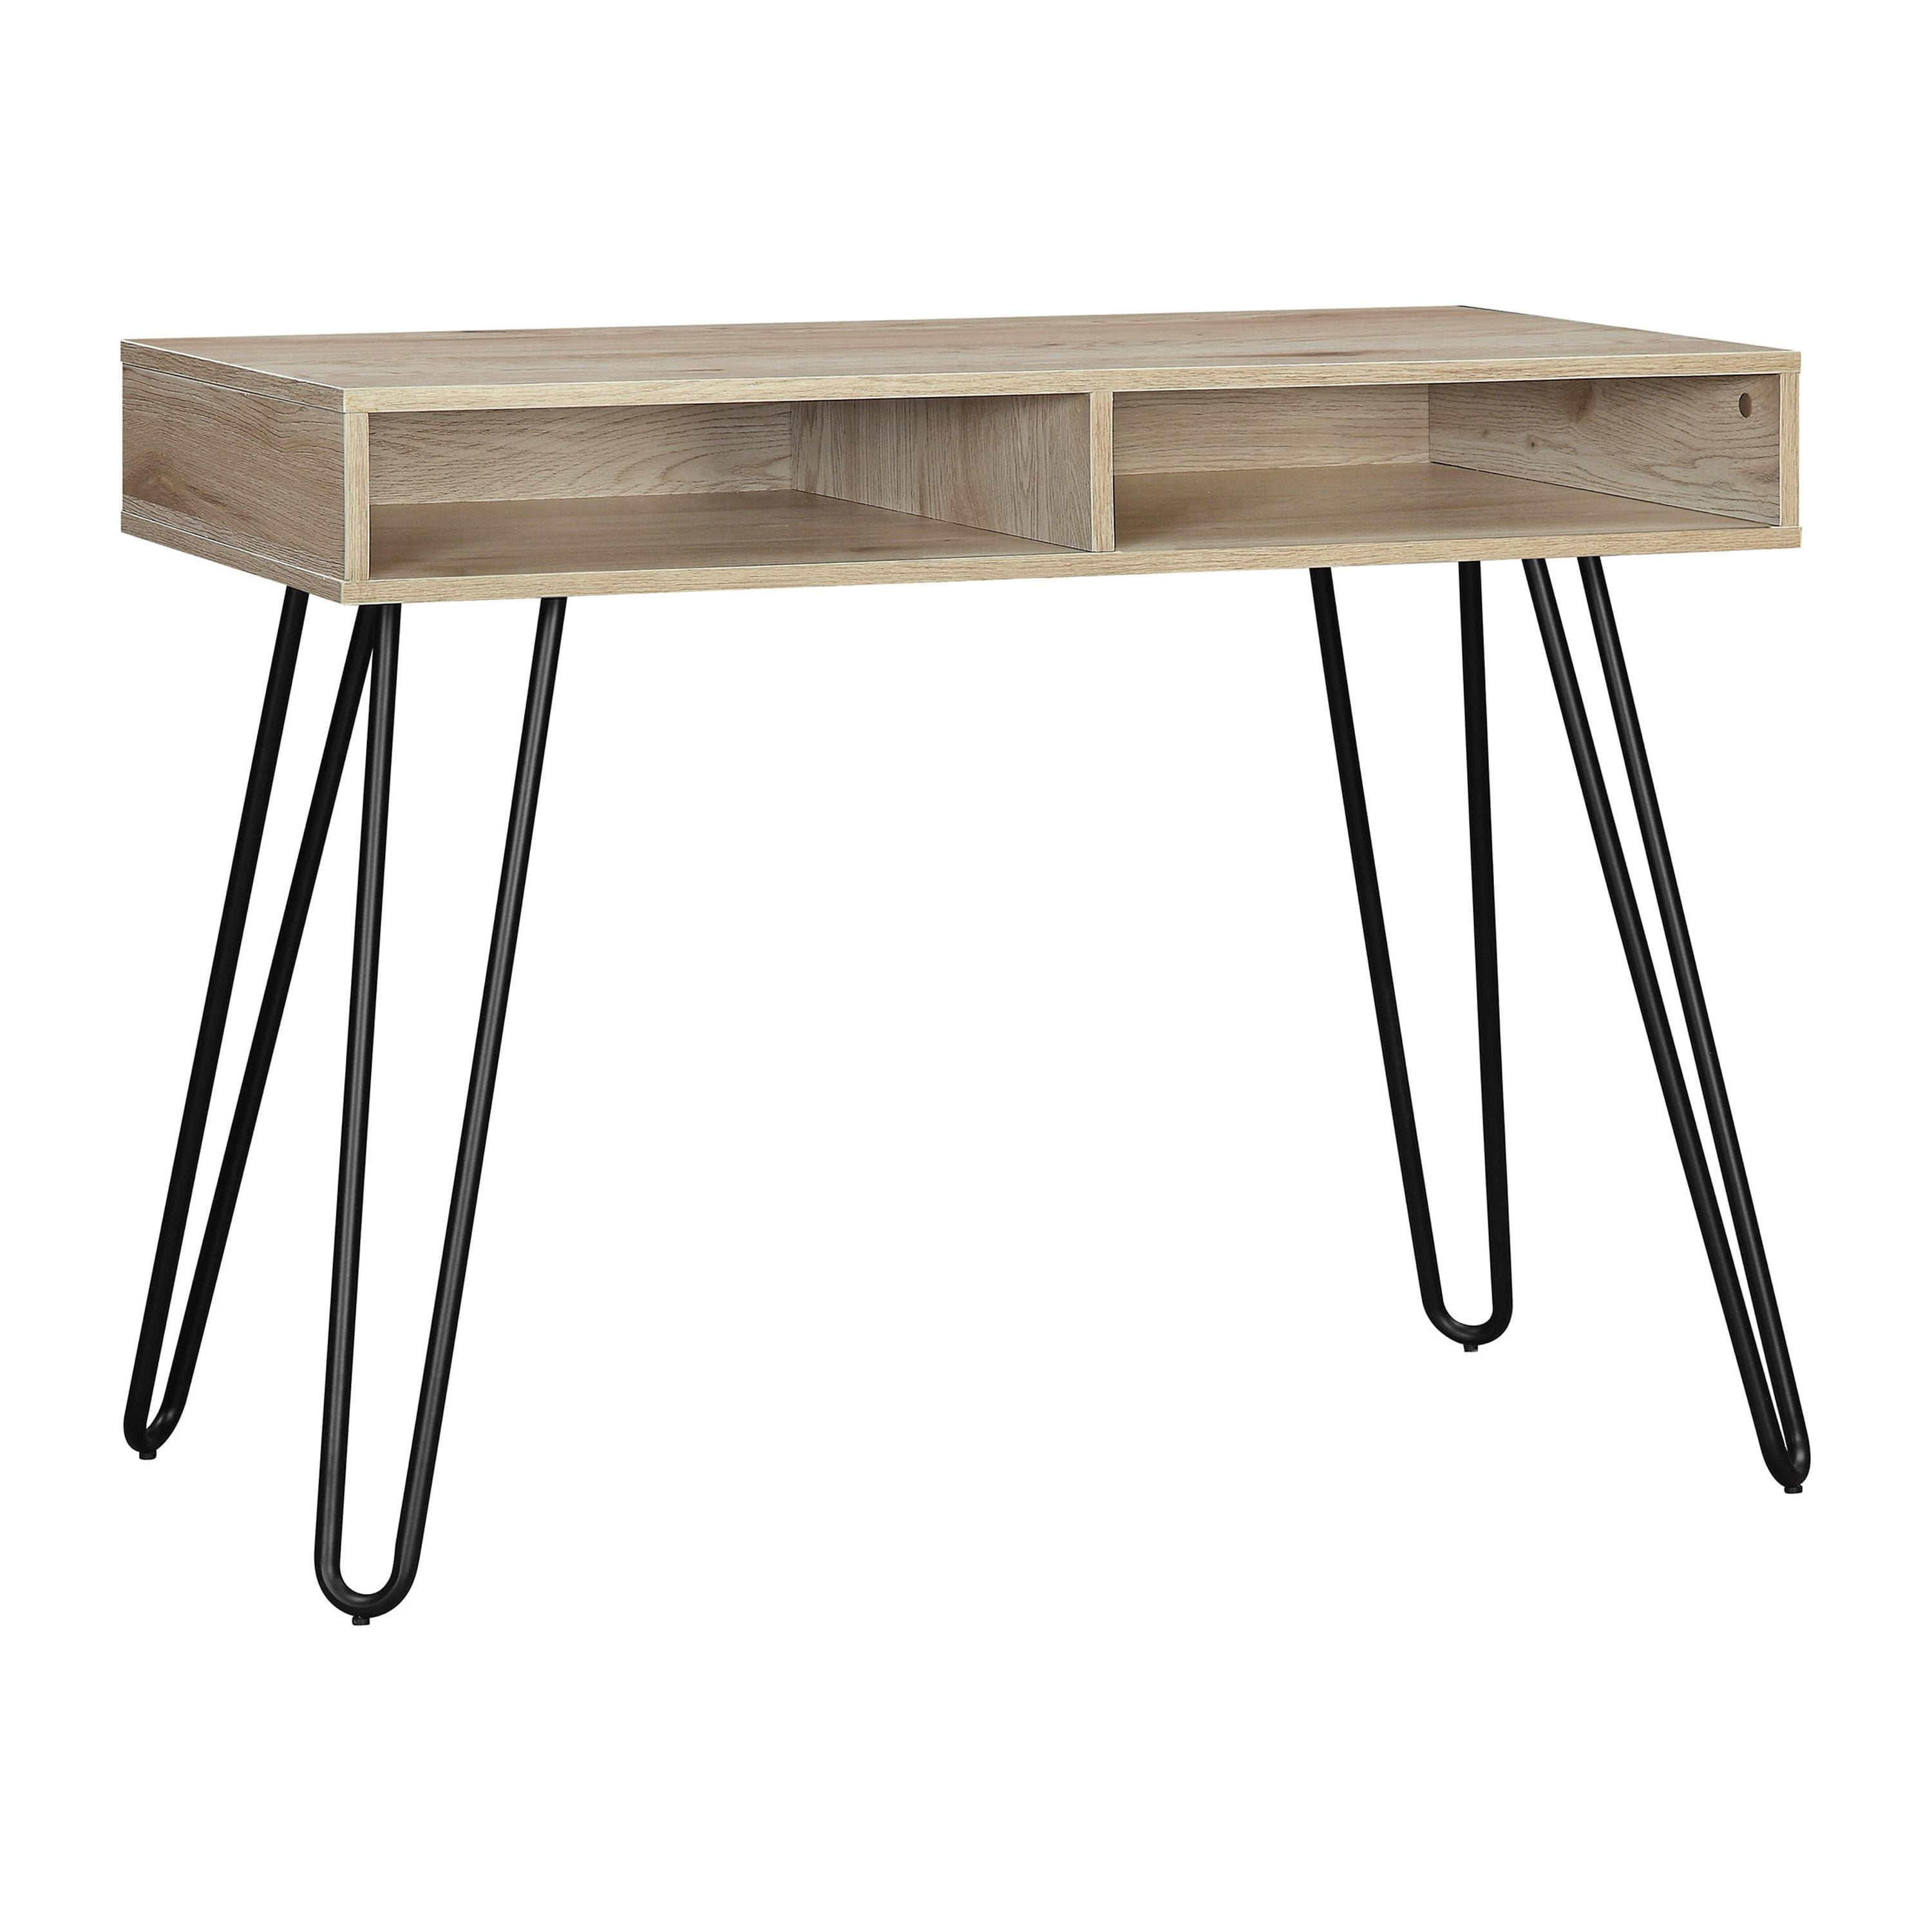 40" Mainstays Hairpin Writing Desk (Beige, Black) $45 + Free Shipping